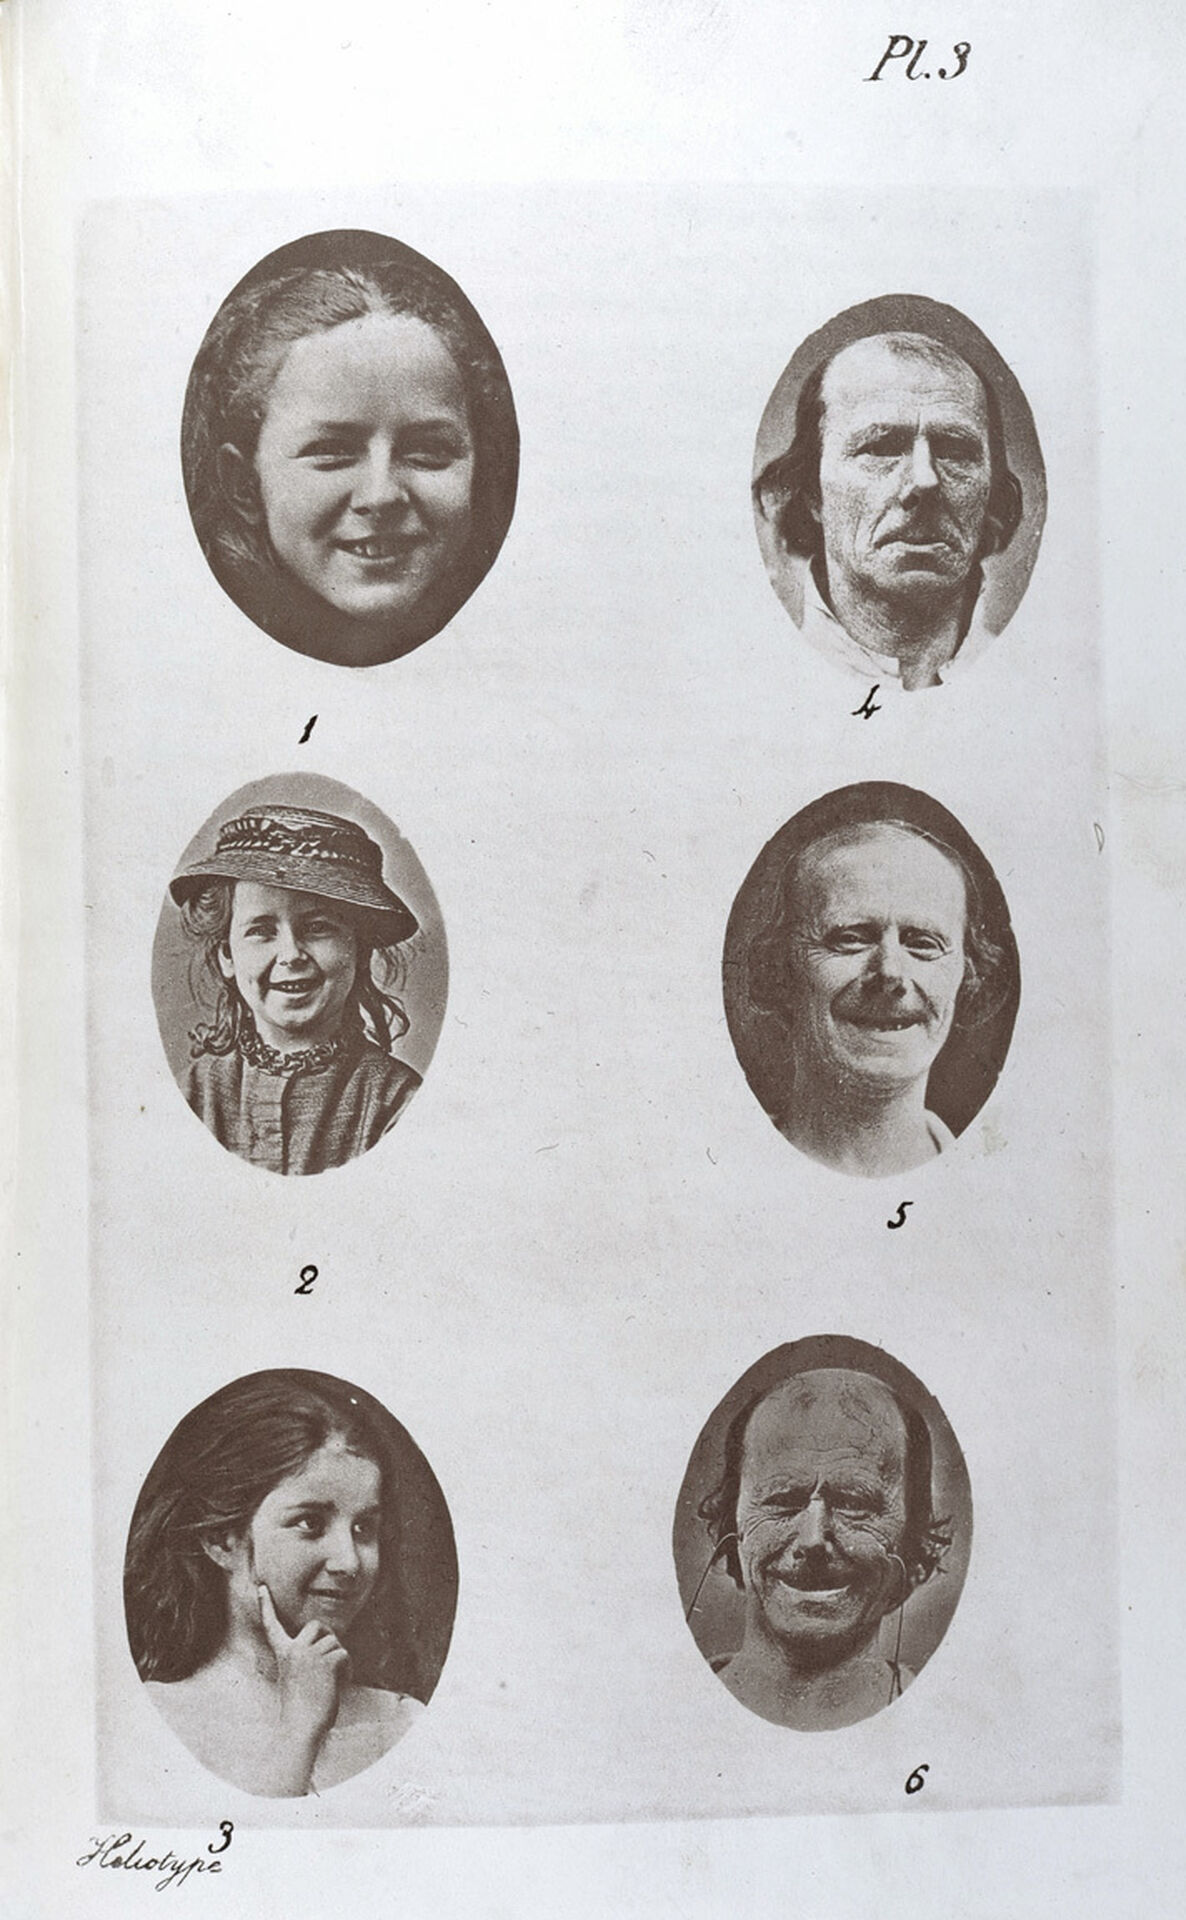 Pictures in Charles Dawrwin's book The Expression of the Emotions in Man and Animals, showing "Joy".